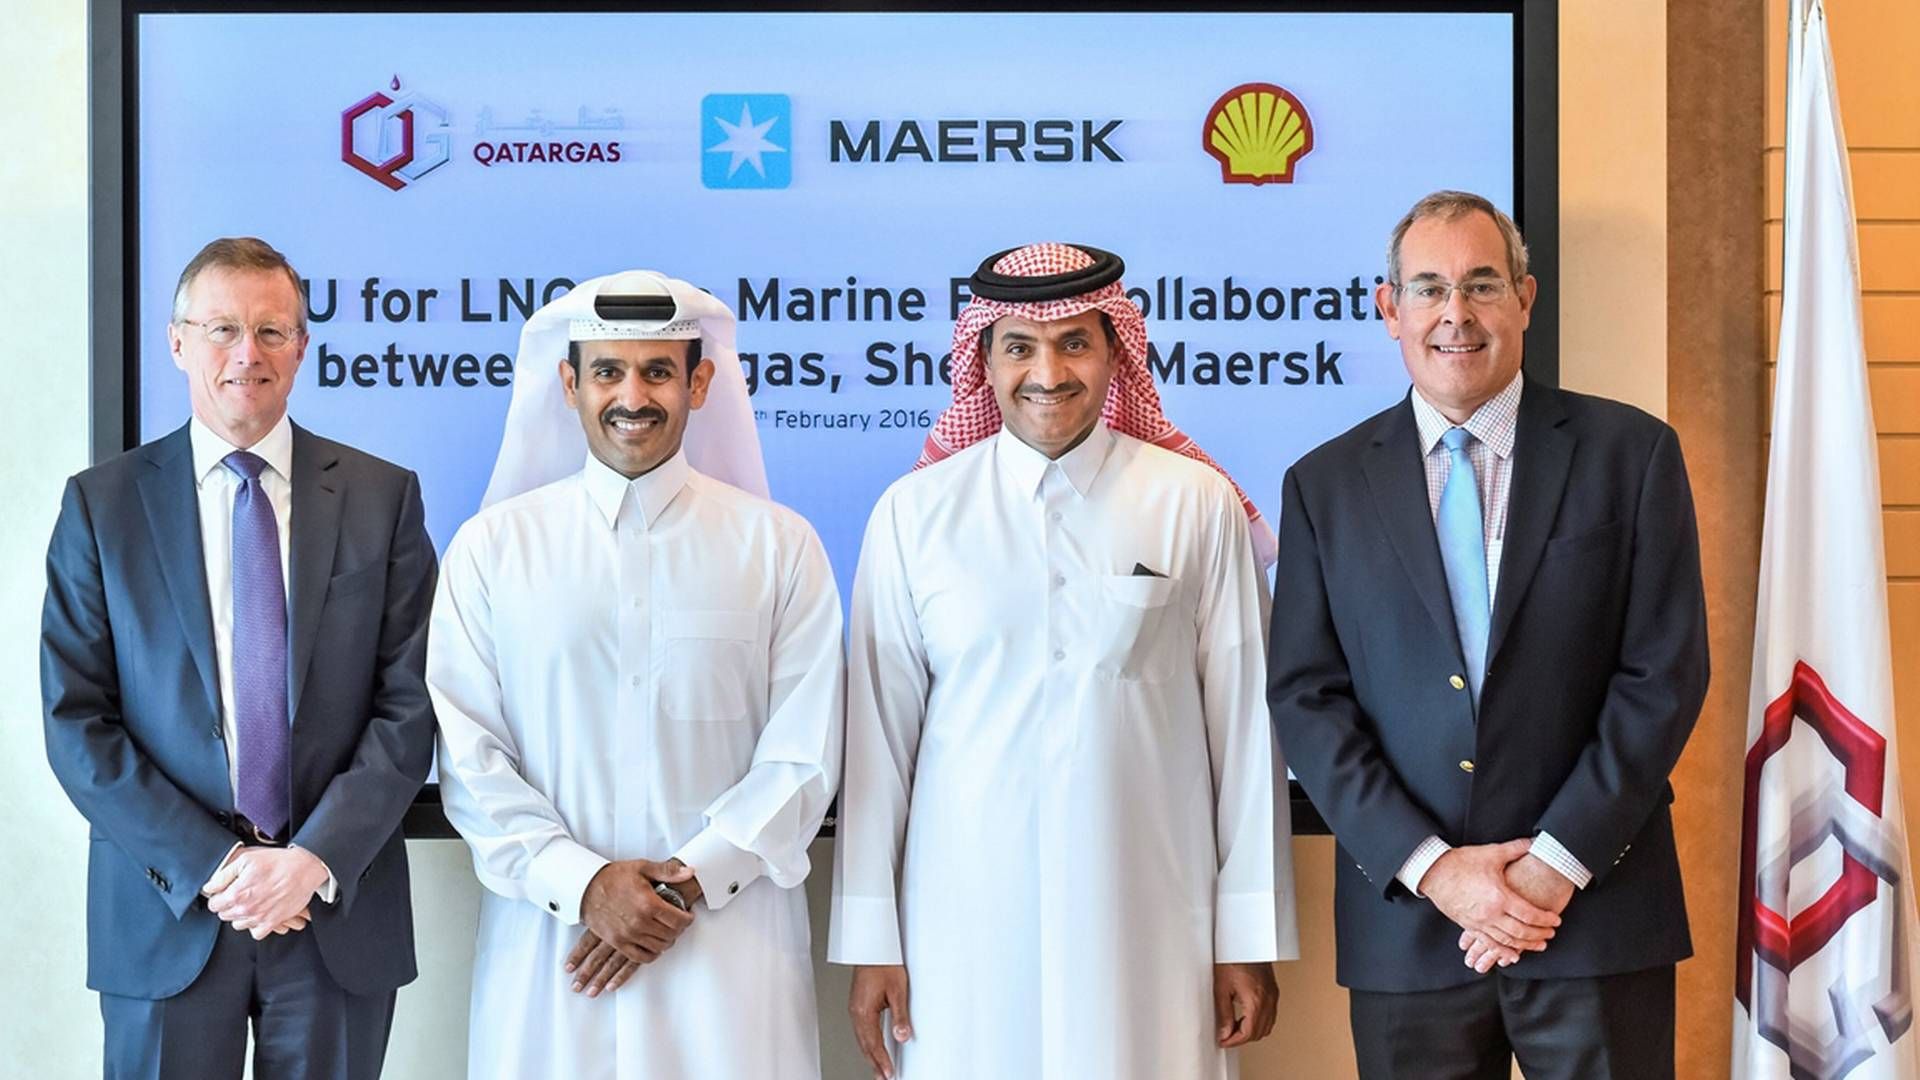 Saad Sherida Al-Kaabi, Chairman of Qatargas, Qatargas CEO, Khalid Bin Khalifa Al-Thani, CEO of Maersk Group Nils S. Andersen and Danny Leek, and Shell's Manager of the Middle East, at the signing of the MOU. | Photo: Qatargas